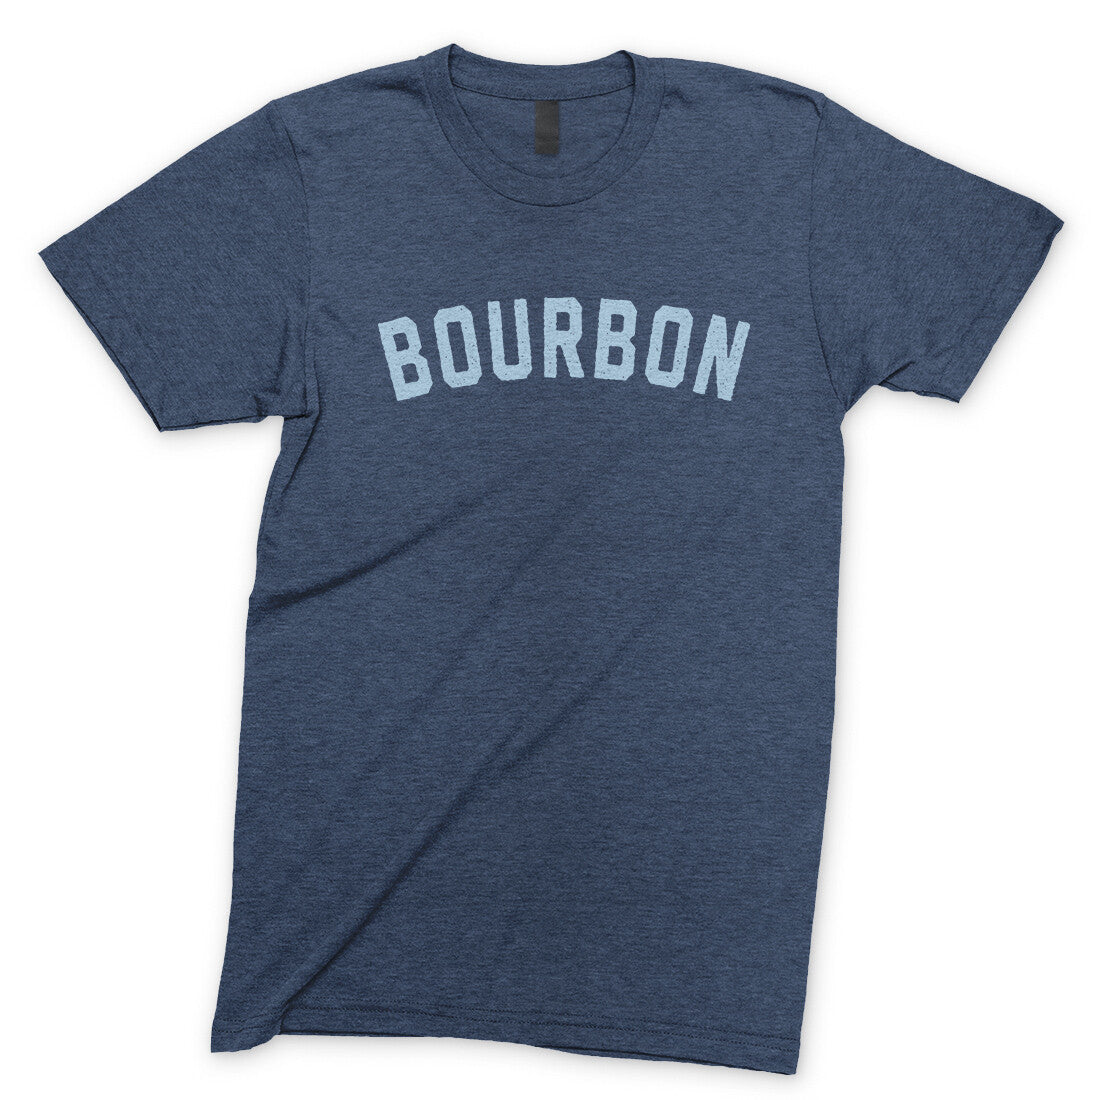 Bourbon in Navy Heather Color